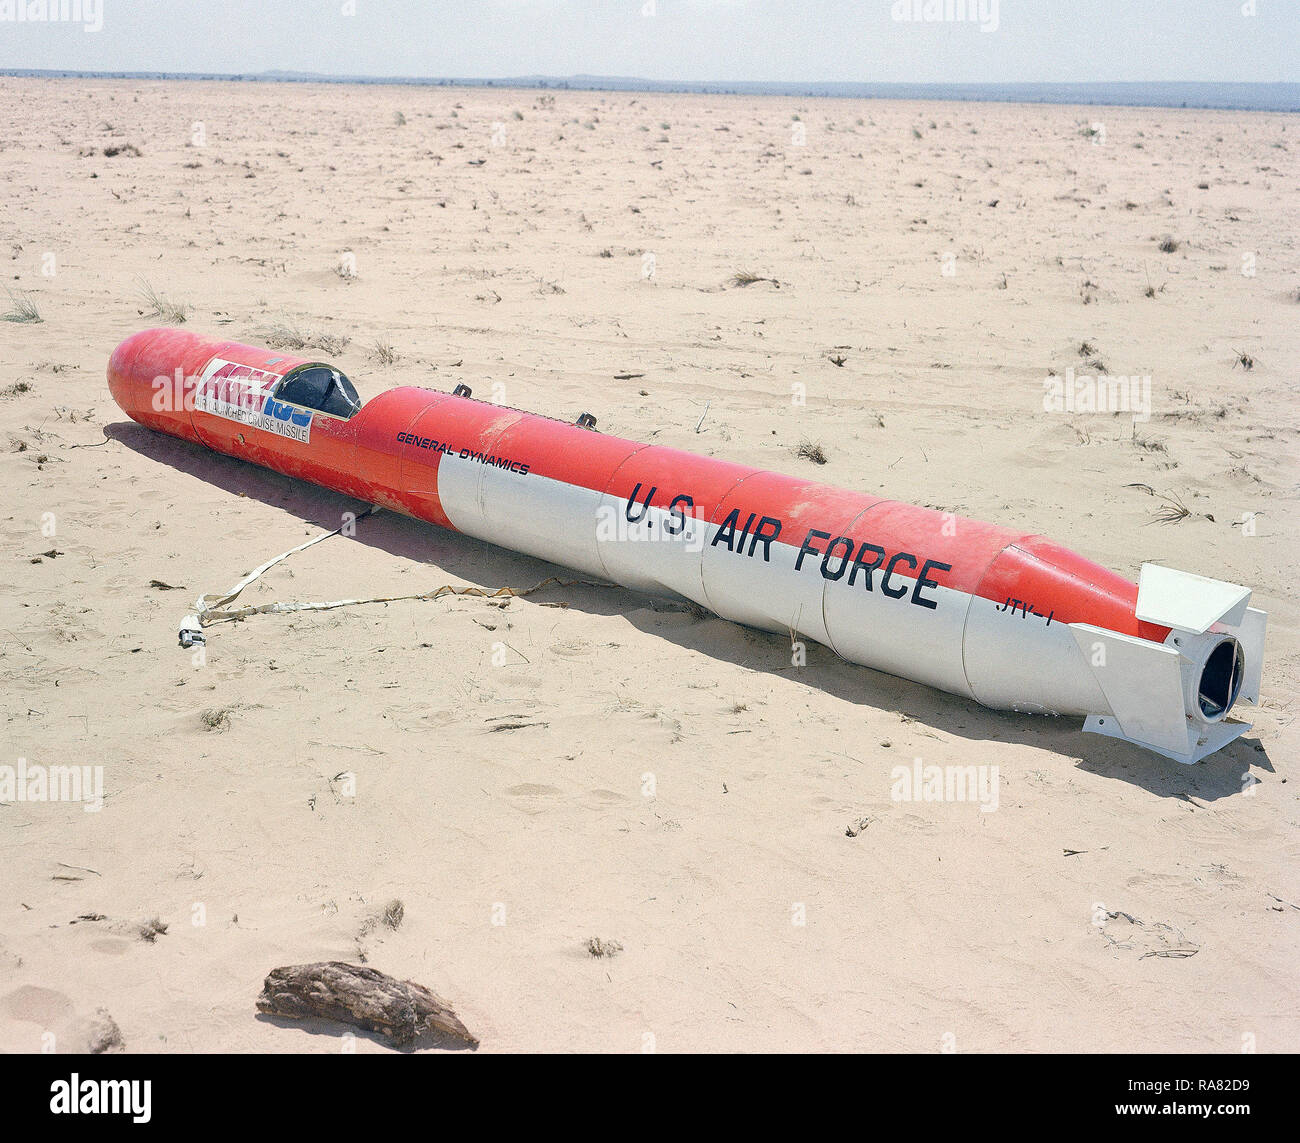 1979 - A rear view of an AGM-109 Tomahawk air-launched cruise missile on the ground after the impact. Stock Photo